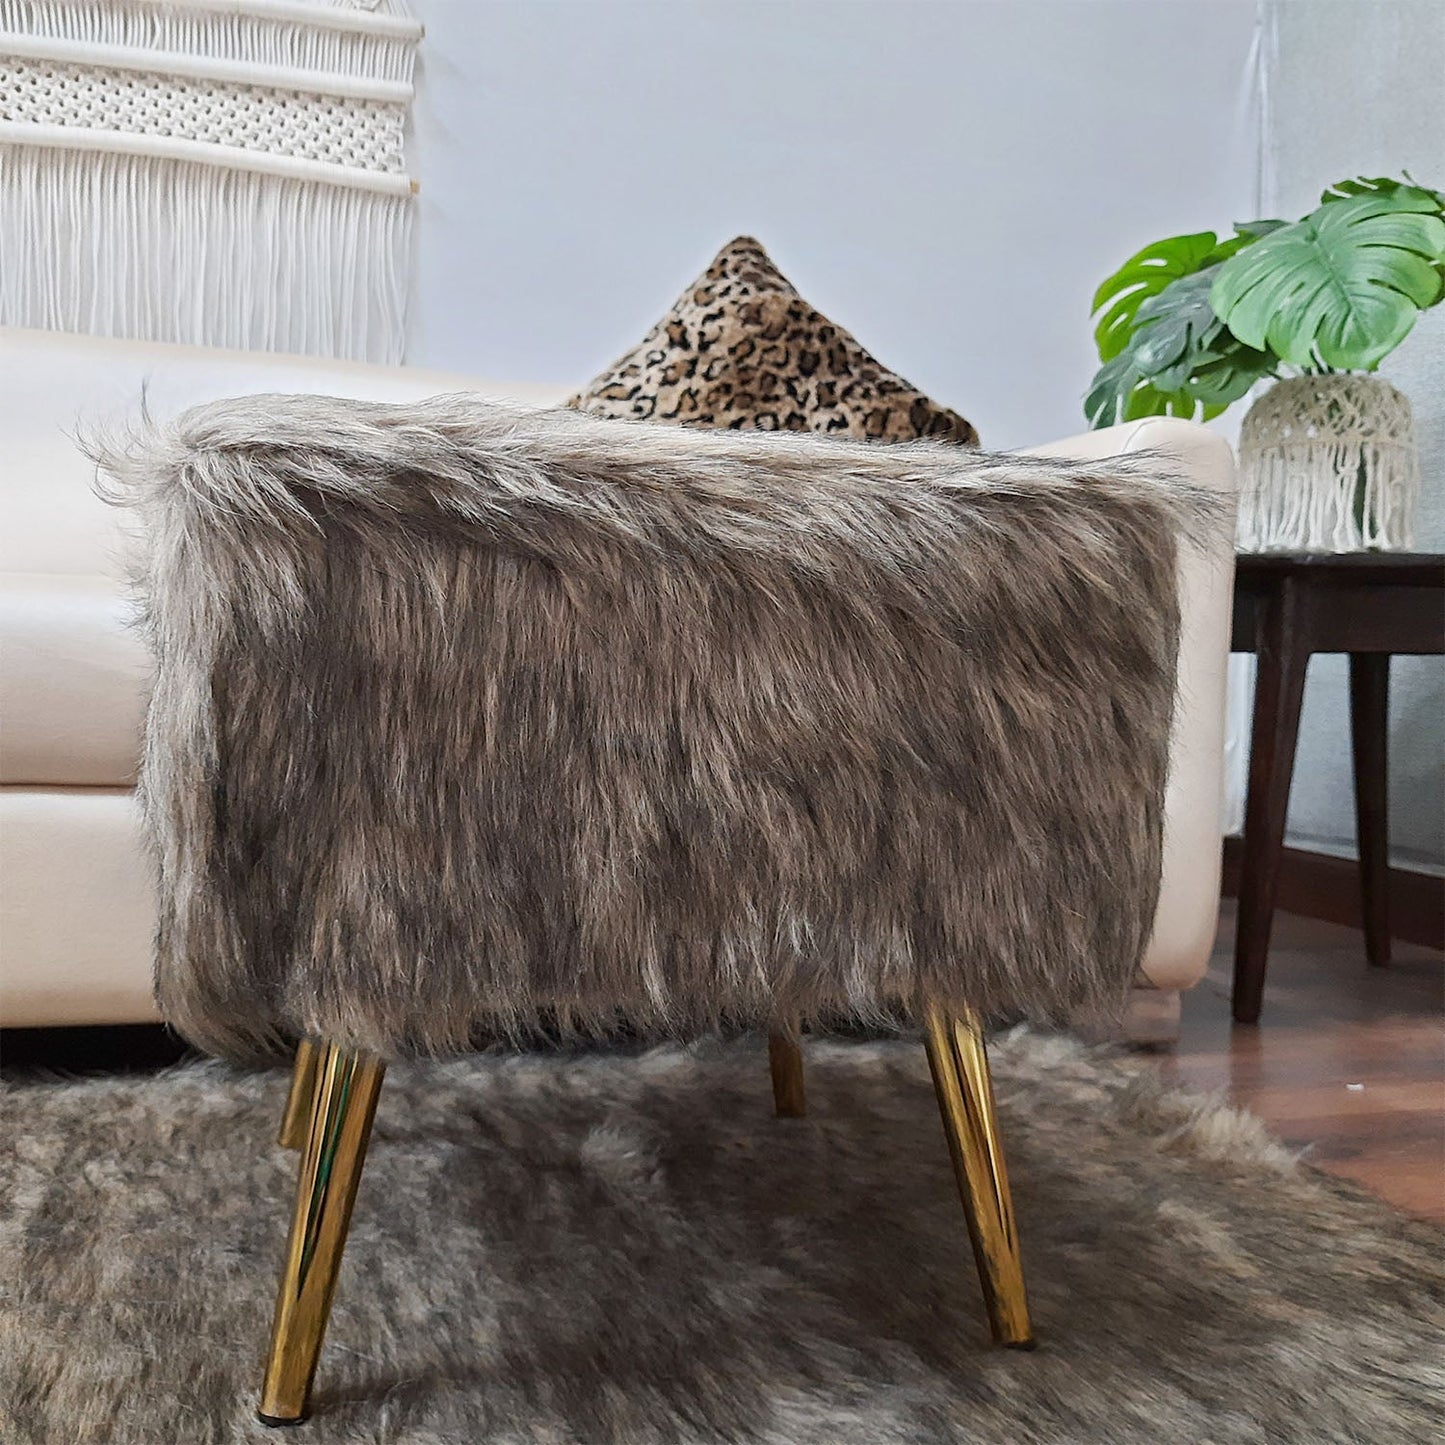 Noviato Collection – Shades of Grey/Brown Premium Long Faux Fur Footstool Gold Metal Legs Modern On-Trend Style Square Multi-Functional Ottoman Stool Seat, 40 cm Tall | from Avioni